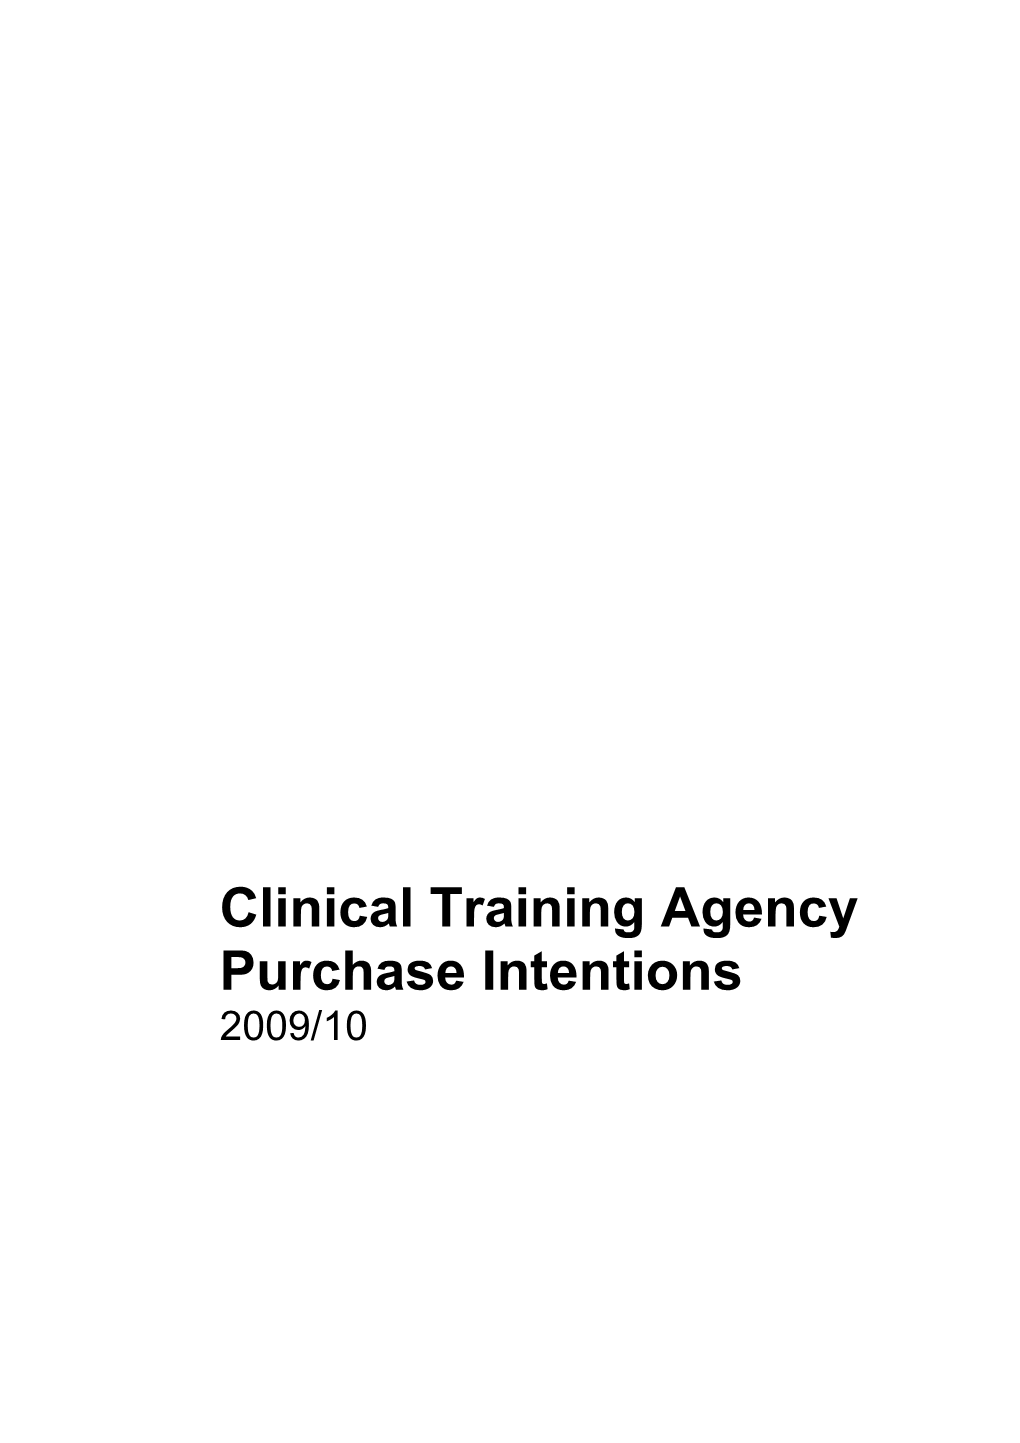 Clinical Training Agency Purchase Intentions